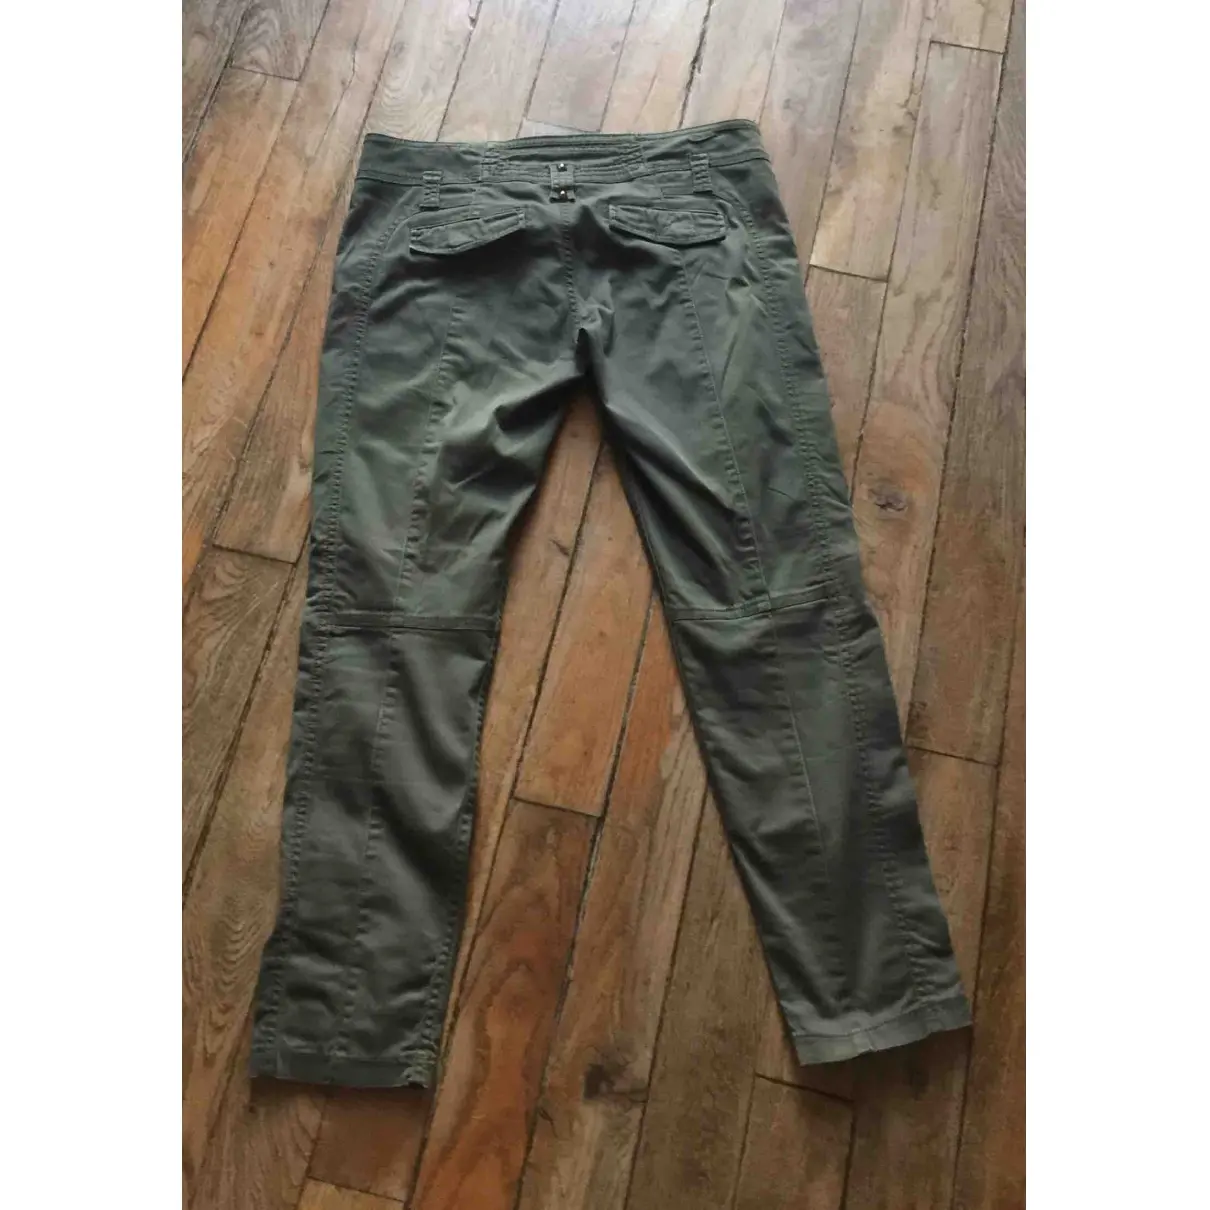 GUESS Chino pants for sale